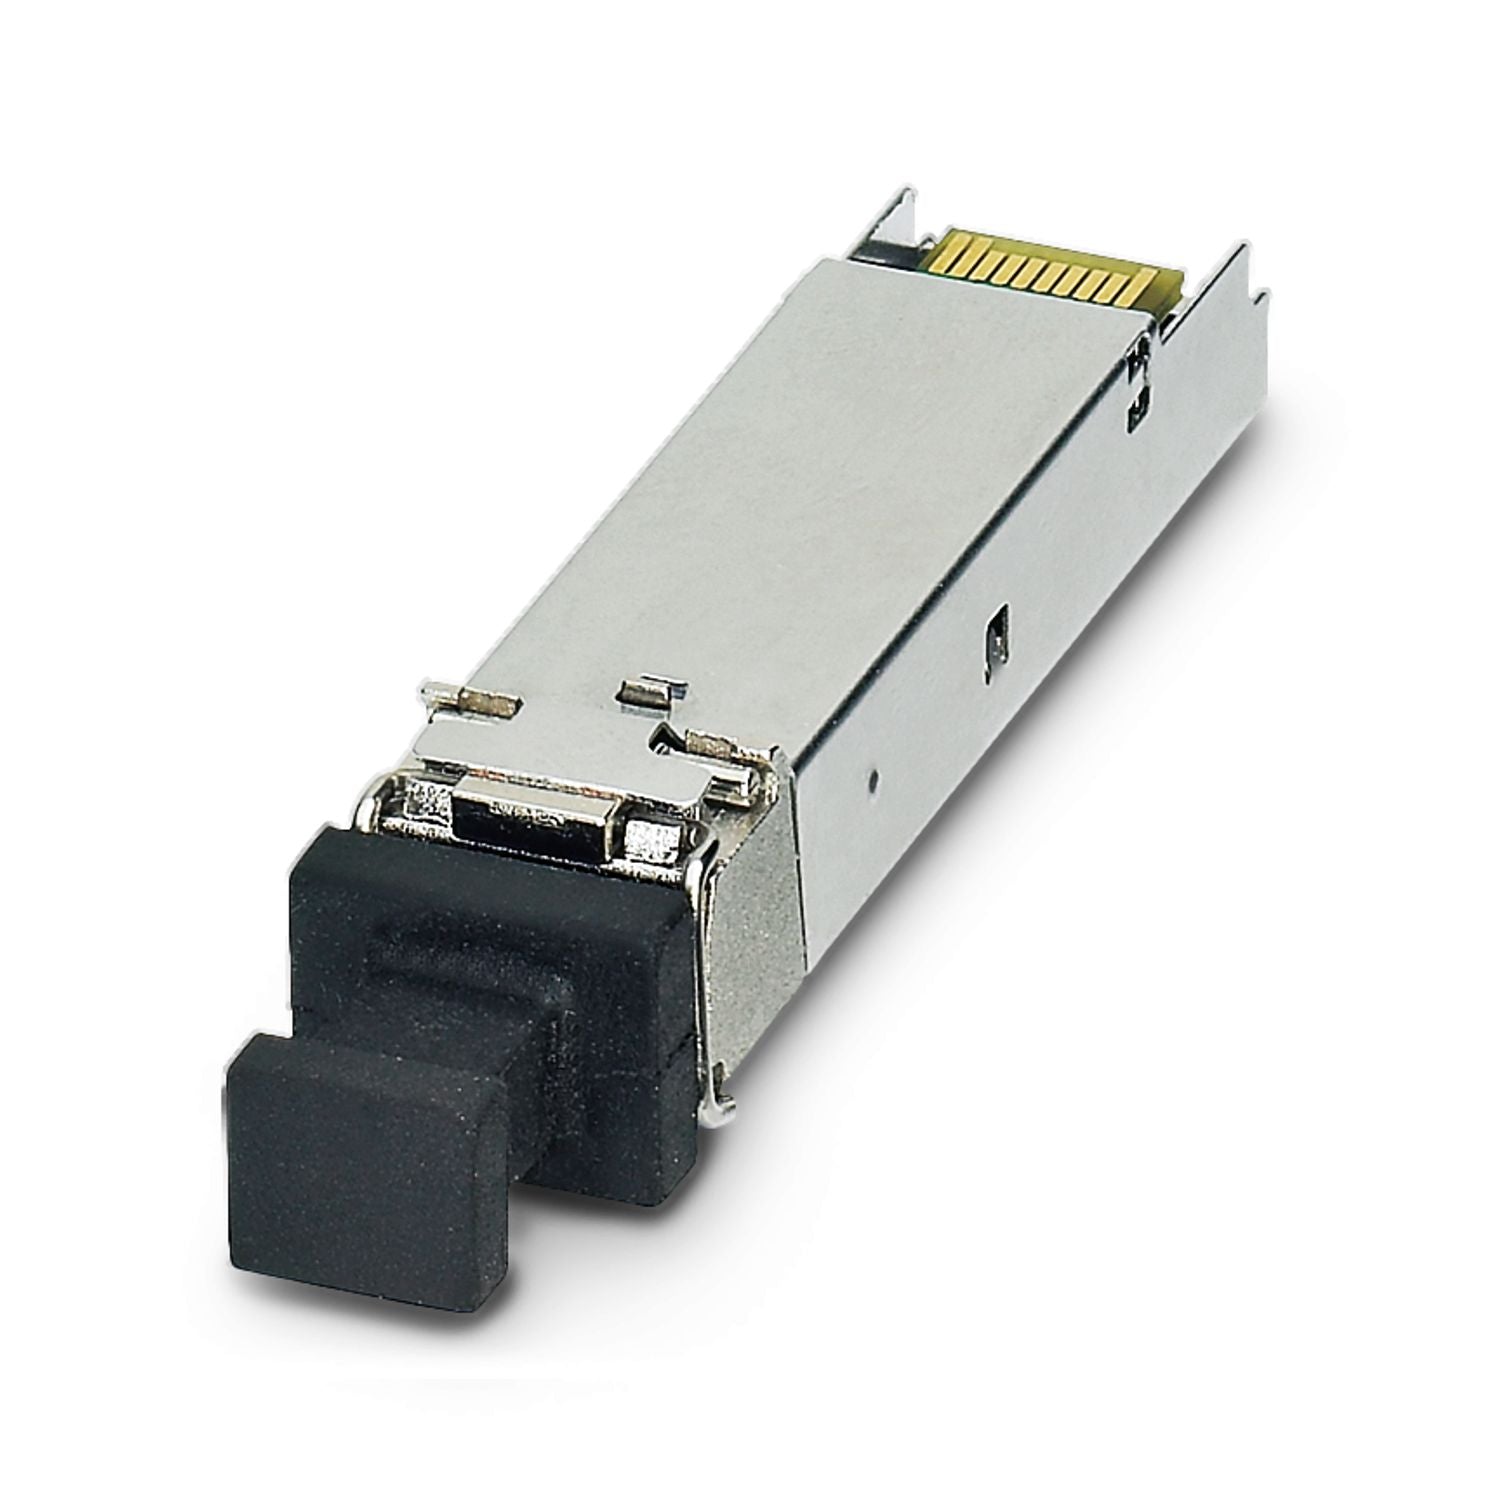 1025401 | Phoenix Contact Gigabit SFP module for transmission up to 10 km with a wavelength of 1310 nm